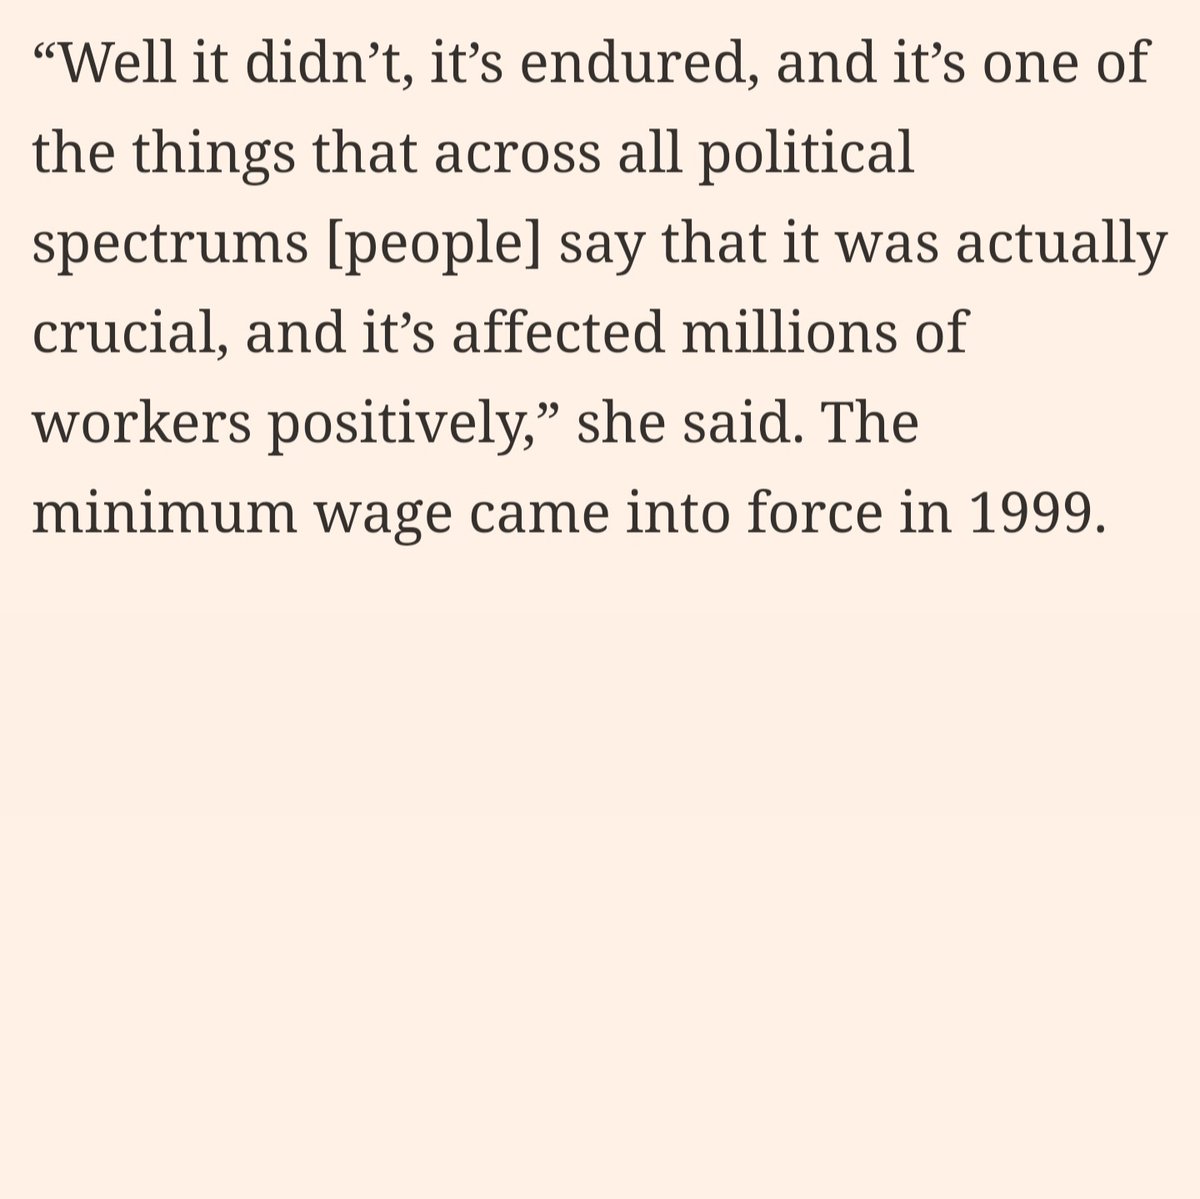 On the 25th Anniversary of the Minimum Wage, let's remember that Labour's crowning achievements have always been in the face of opposition from those saying the sky would fall in if we dared.